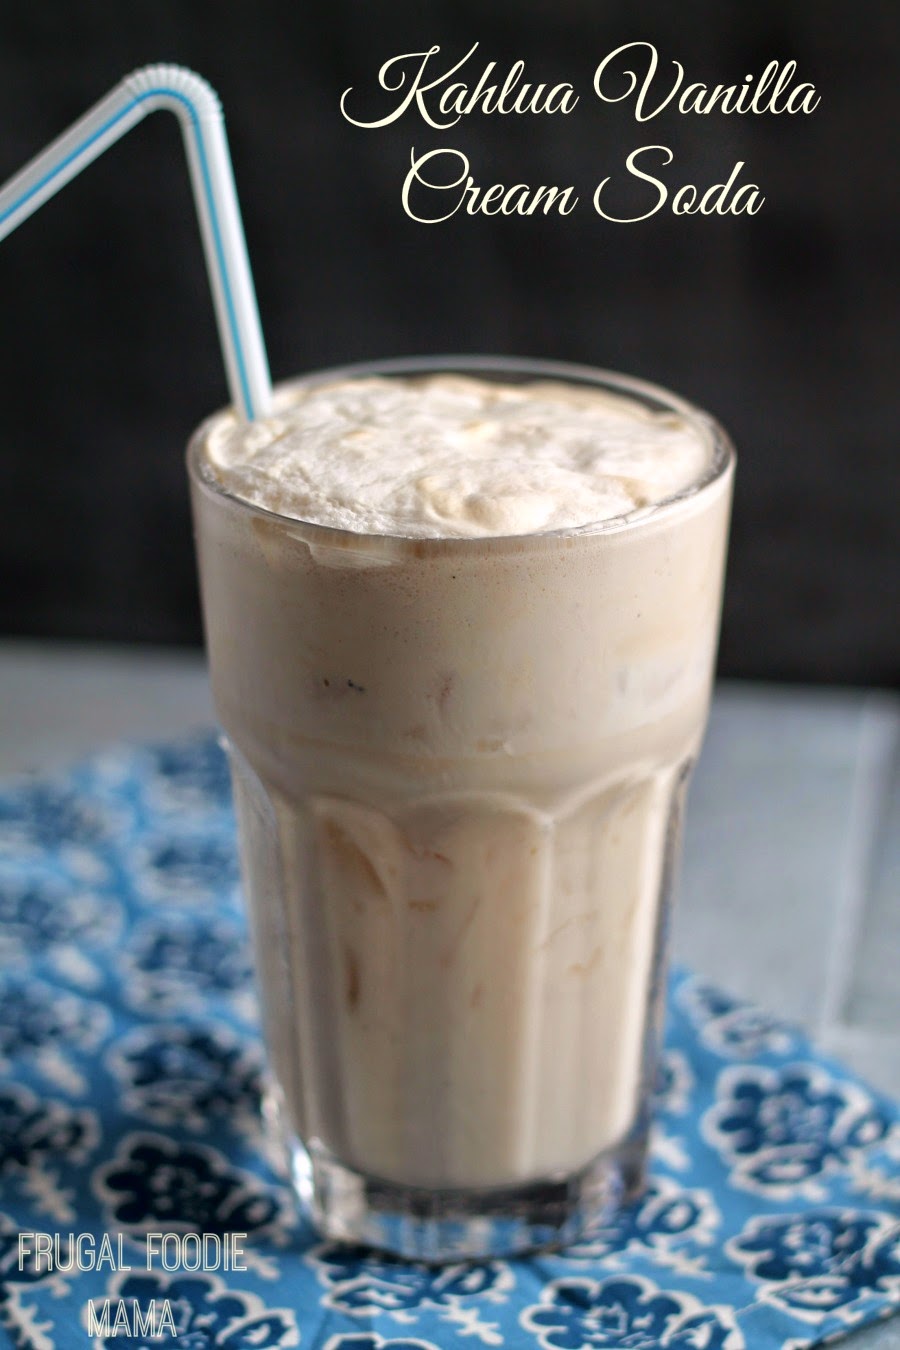 Made simply with Kahlua, whipped cream, pure vanilla bean paste, and a little club soda, this creamy Kahlua Vanilla Cream Soda is just pure bliss.